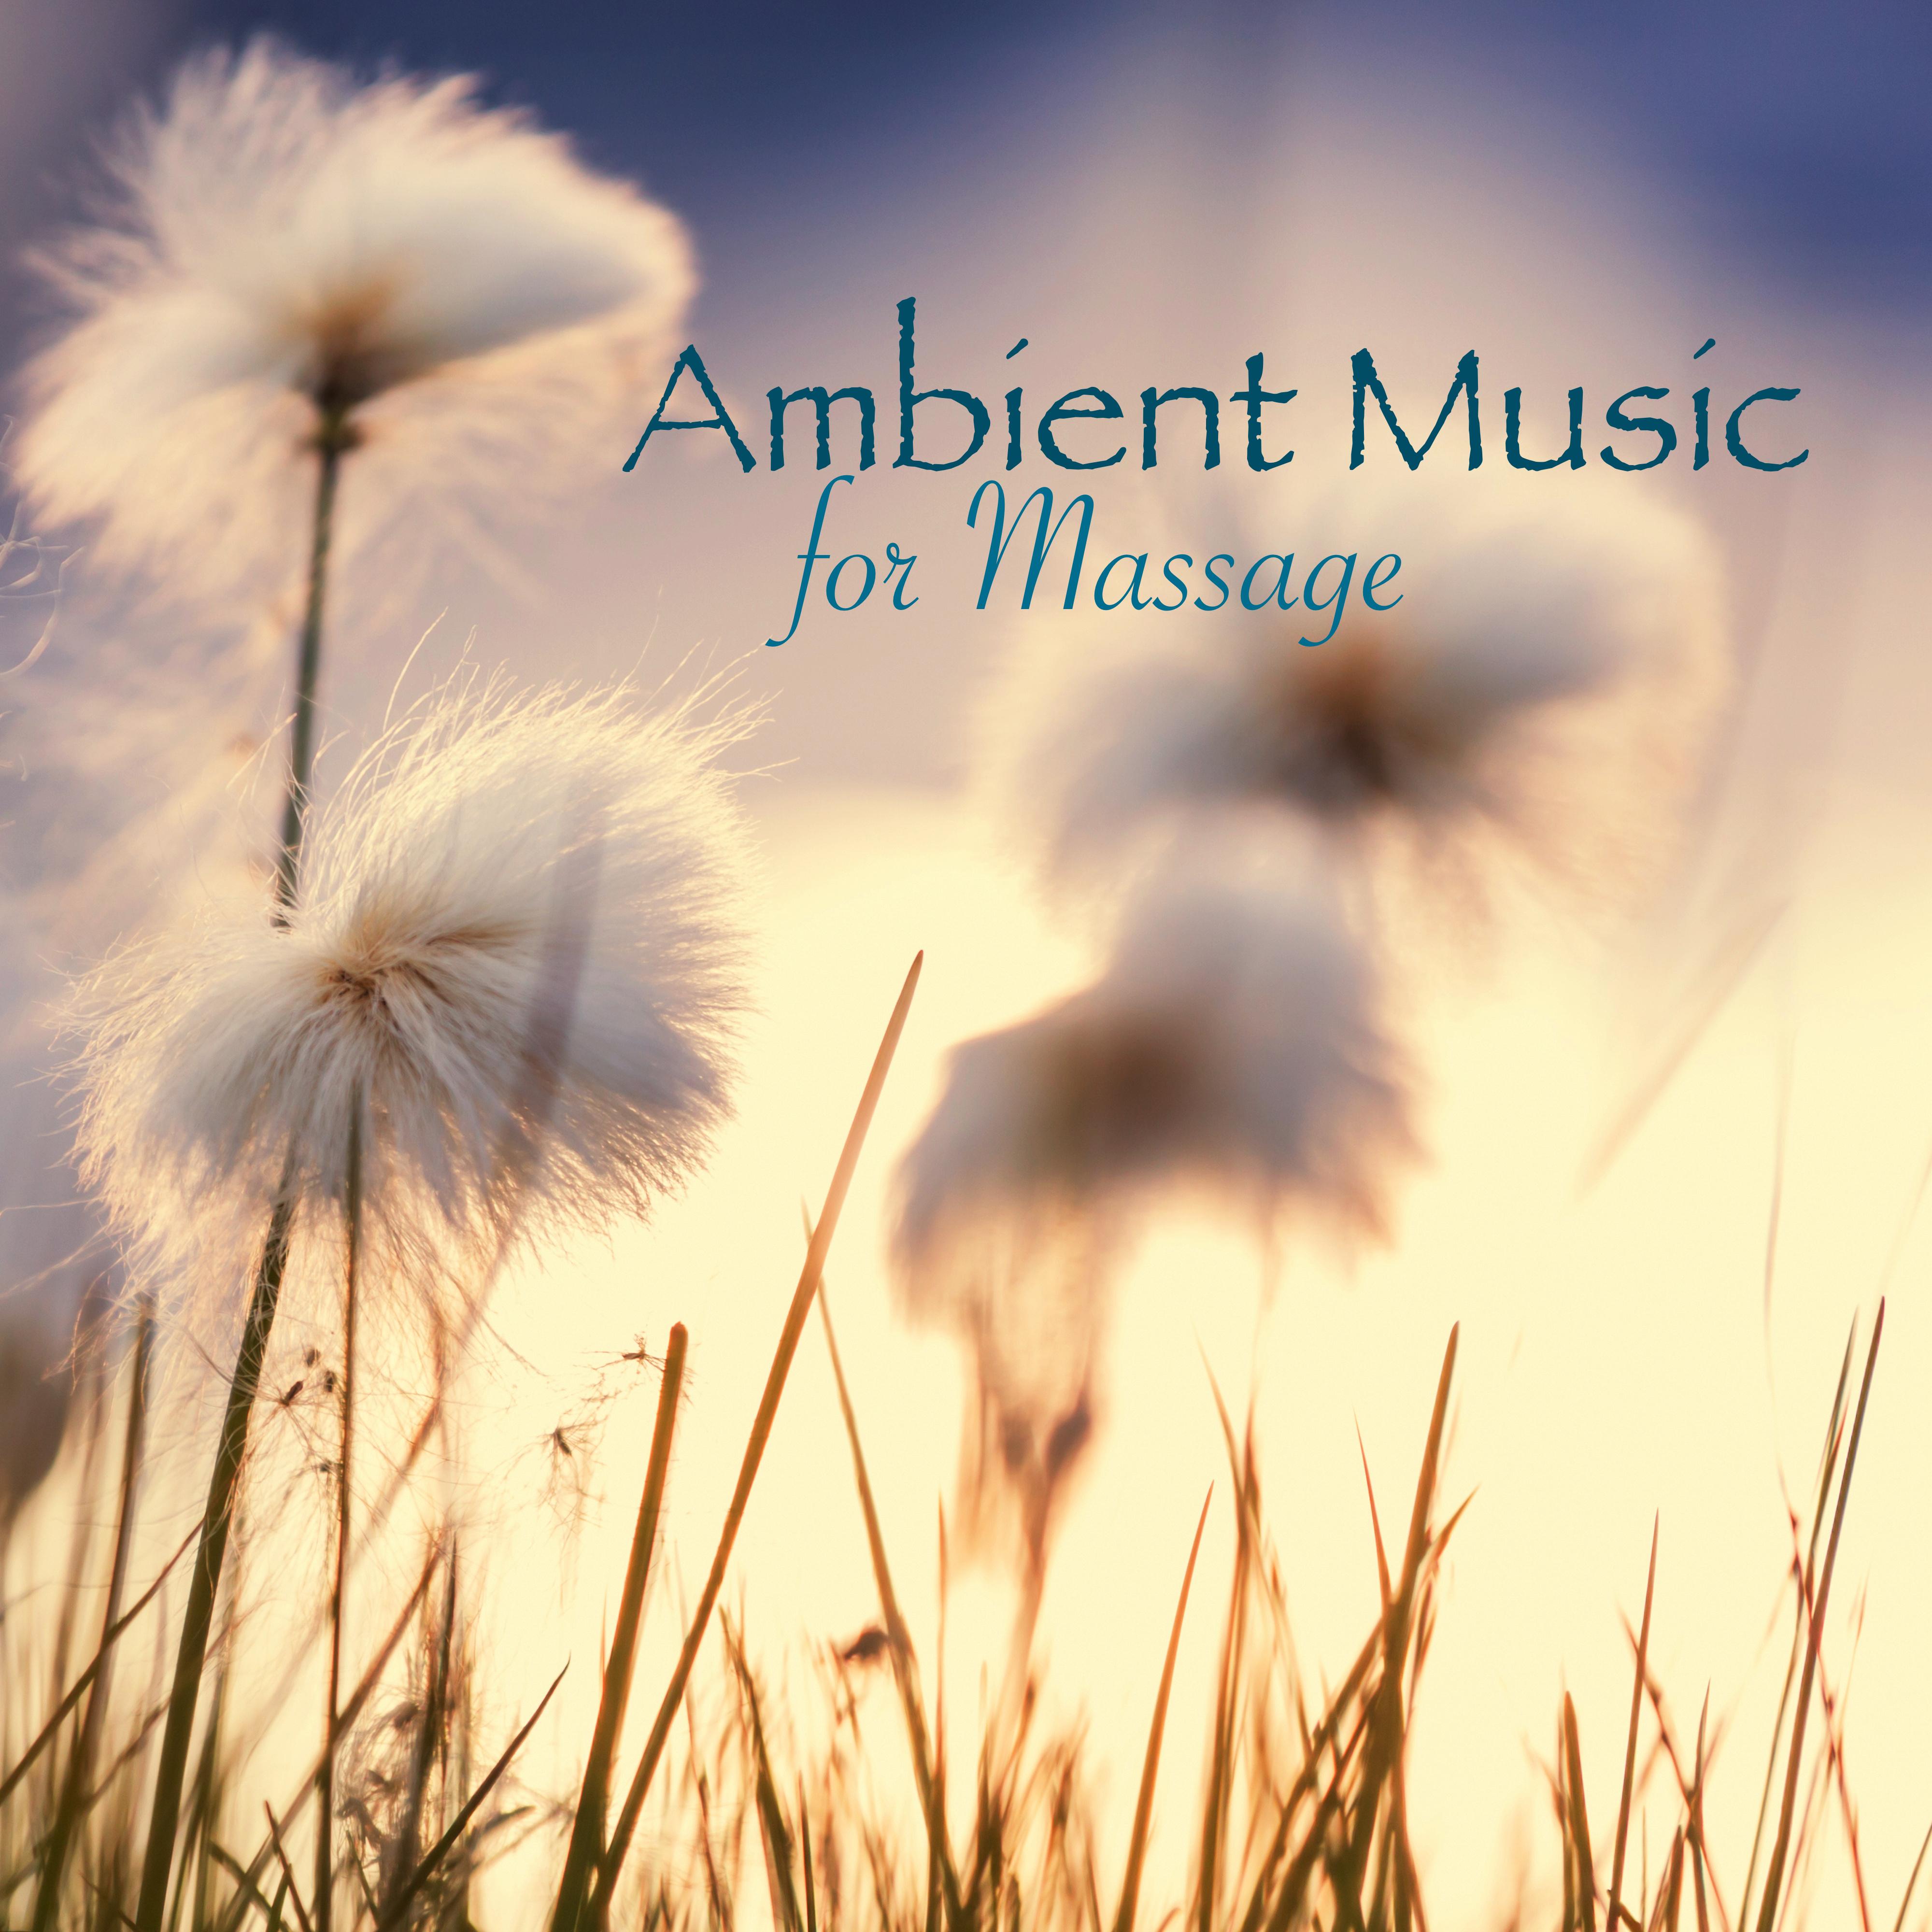 Ambient Music for Massage - Best Background Music for Spa Therapy